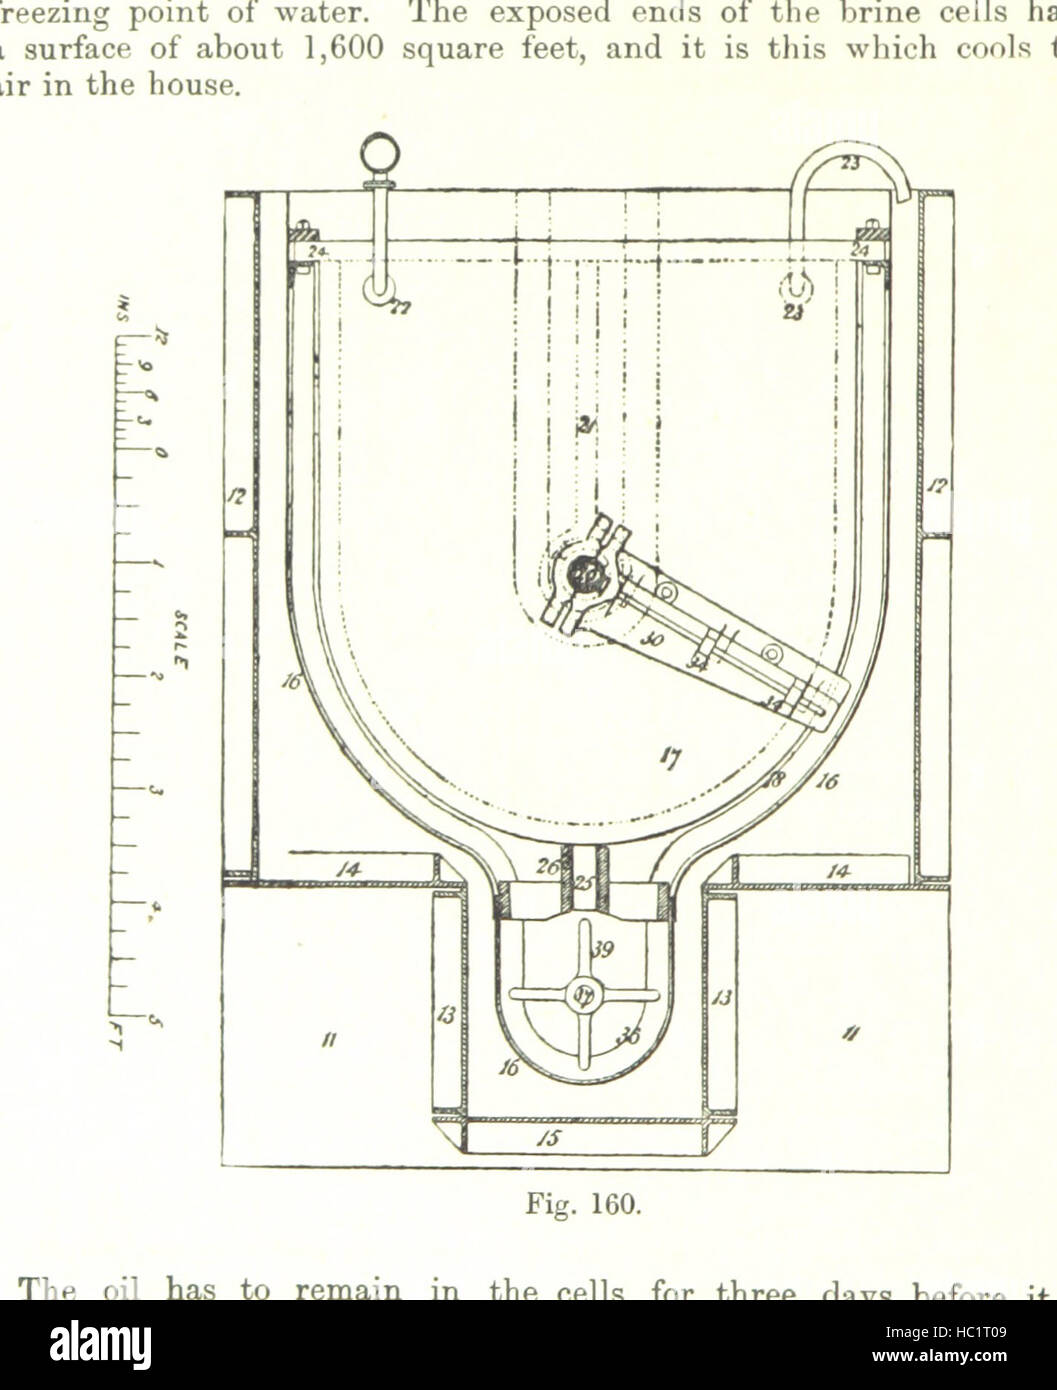 Image taken from page 50 of 'Petroleum: a treatise on the geographical distribution and geological occurrence of petroleum and natural gas ... By B. Redwood, assisted by G. T. Holloway, and other contributors ... With maps, etc' Image taken from page 50 of 'Petroleum a treatise on Stock Photo